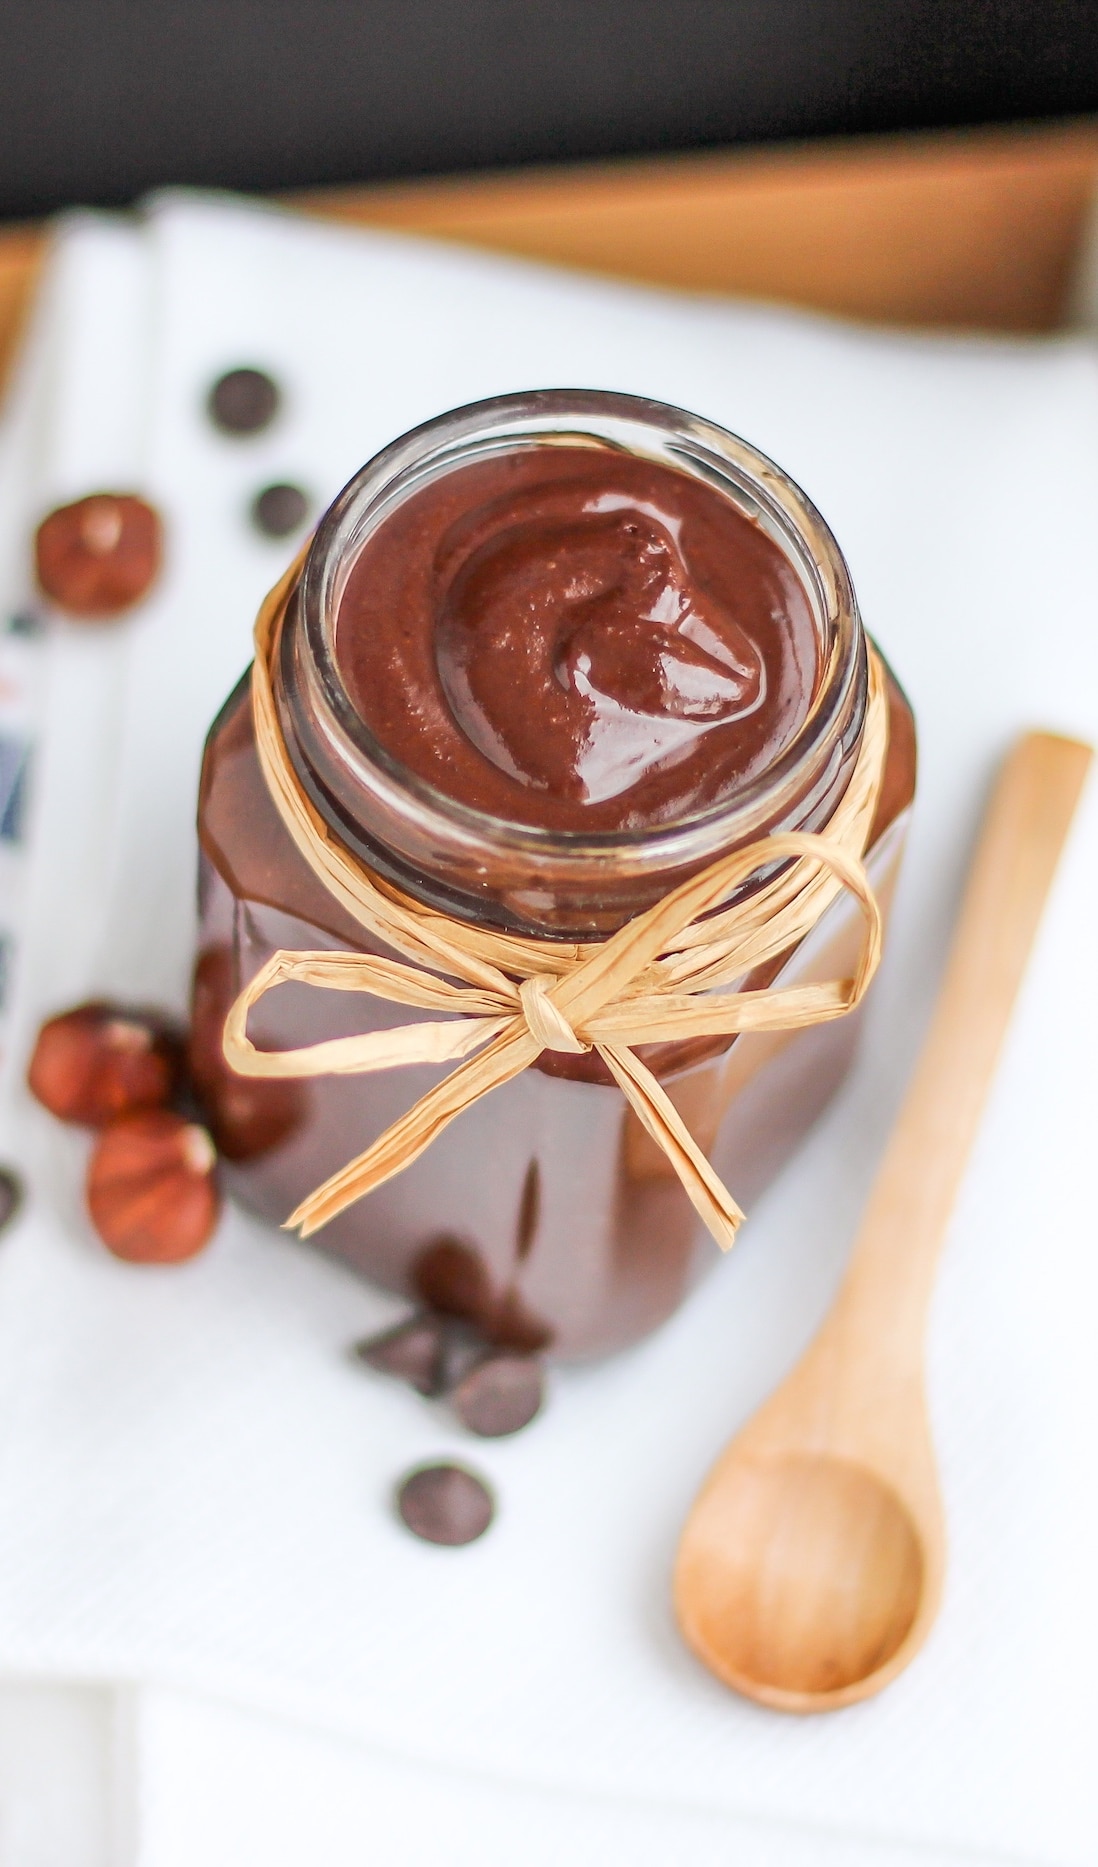 Nutty Velvet Spread (Healthy Homemade Nutella) - From the Naughty or Nice Cookbook, by the Desserts With Benefits Blog